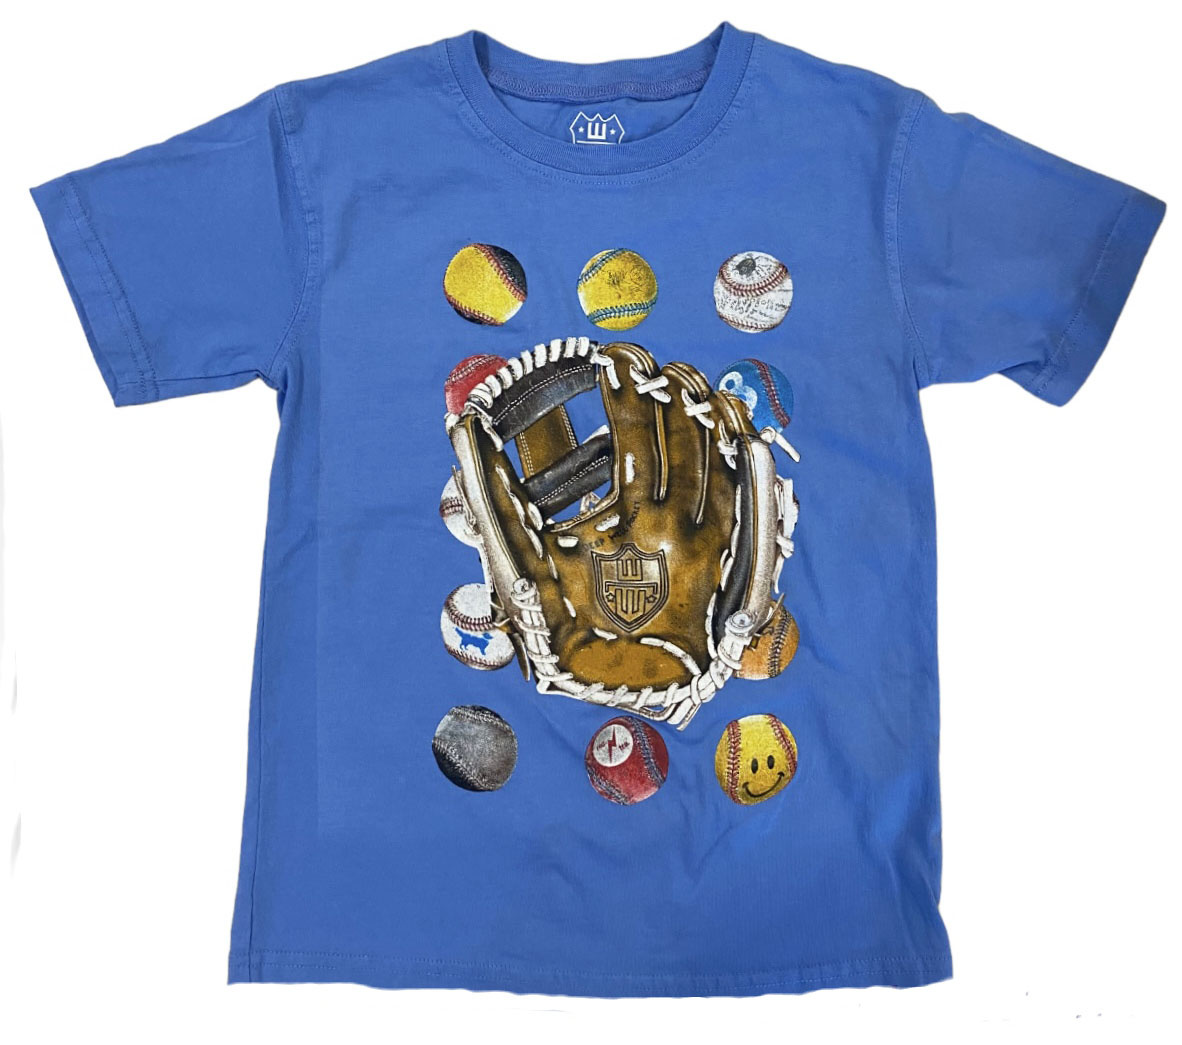 Wes and Willy Baseballs and Glove SS Tee